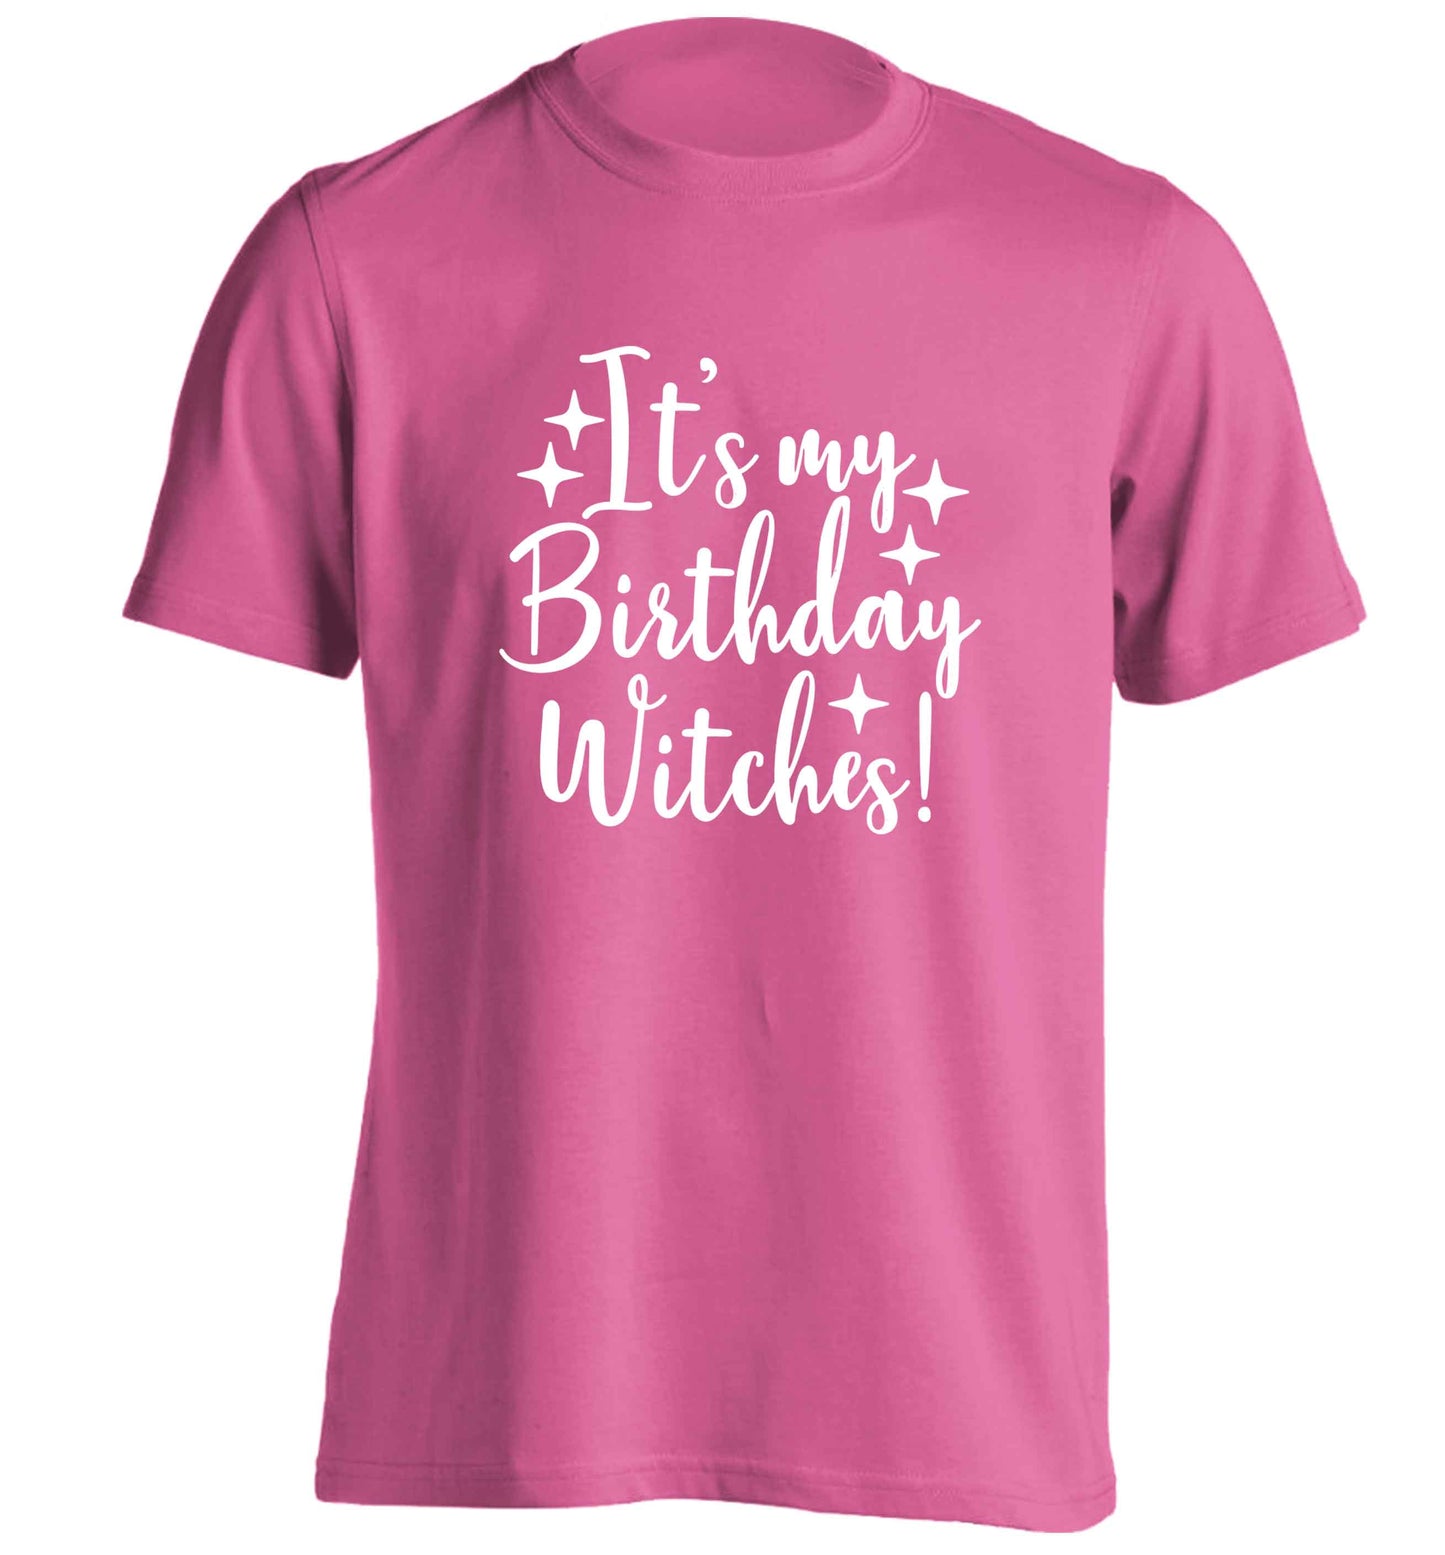 It's my birthday witches!adults unisex pink Tshirt 2XL